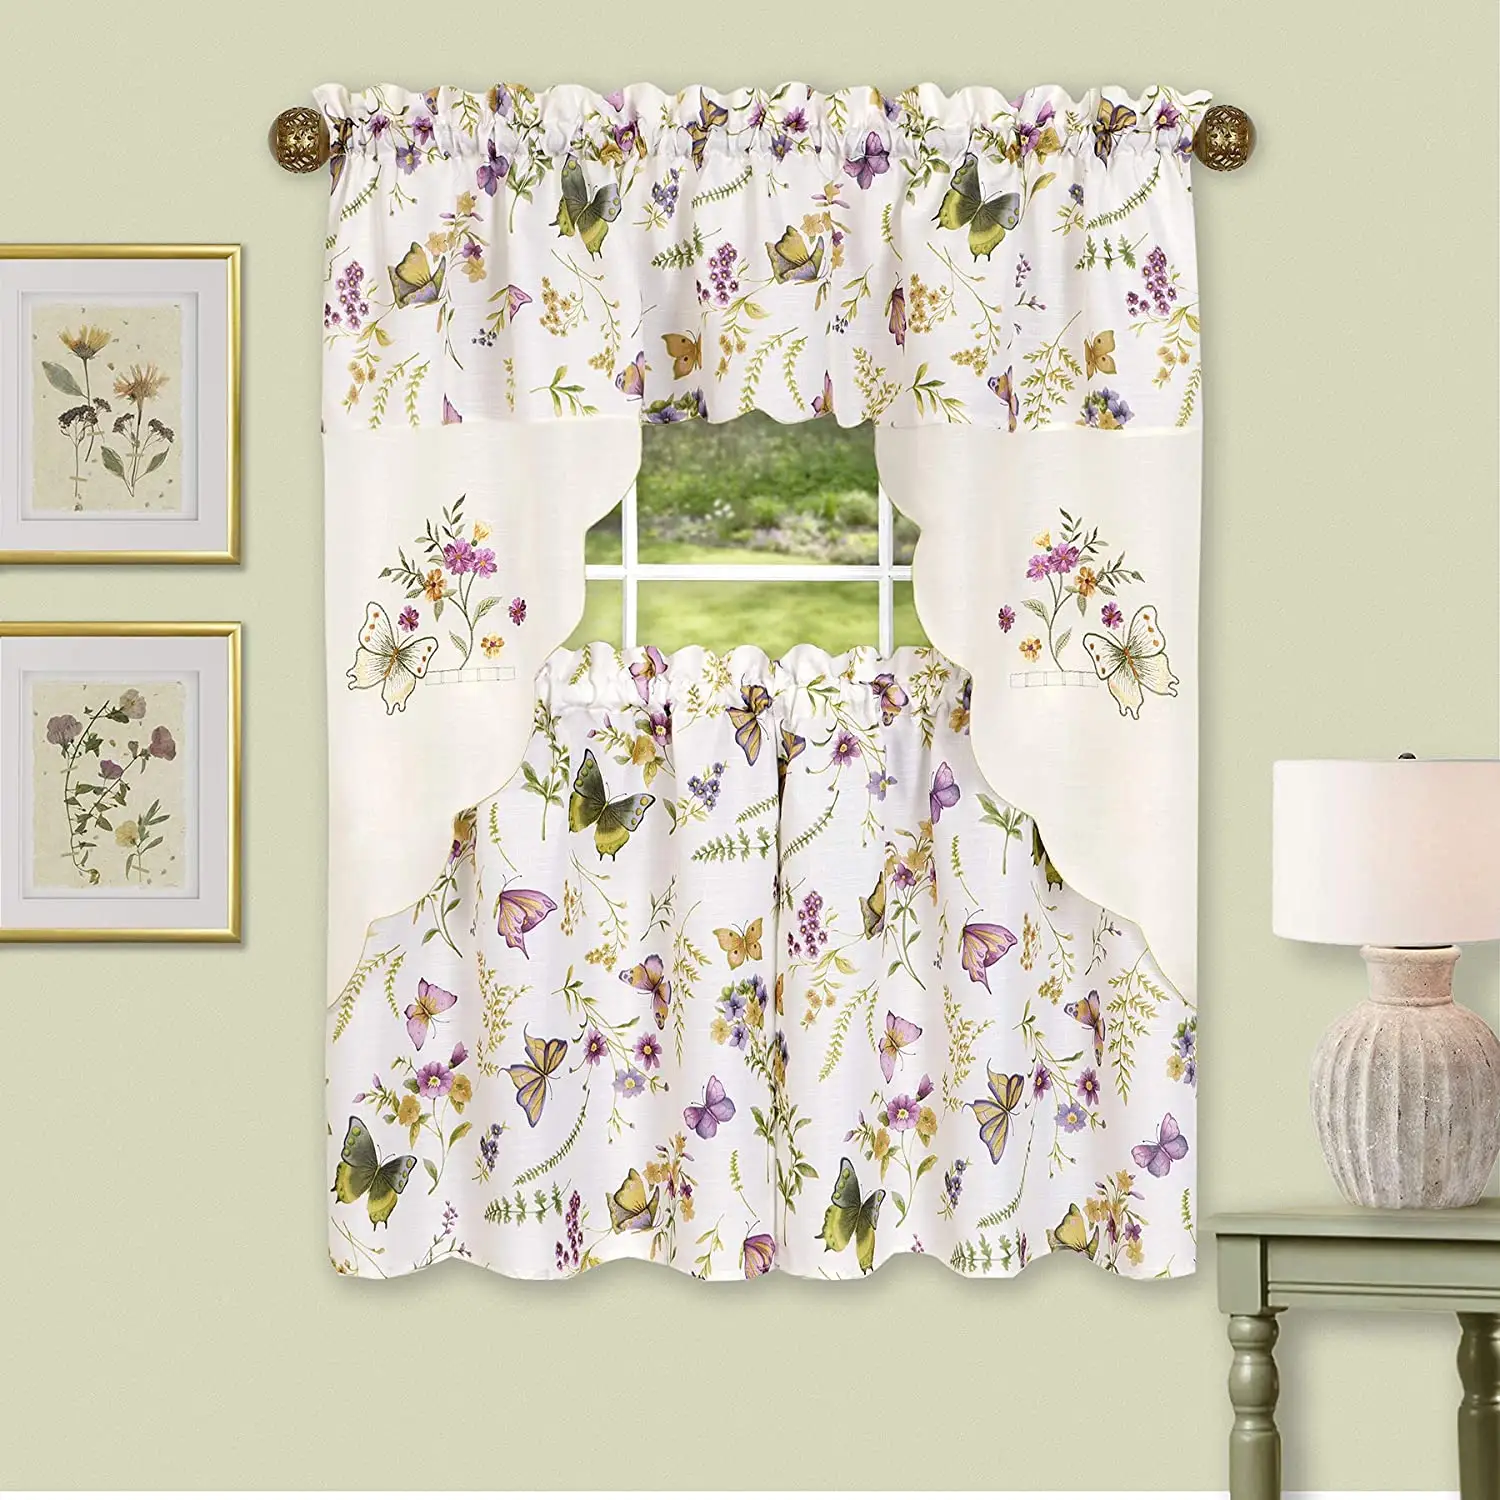 3Piece kitchen cafe curtain set, valance curtain, sprayed on thick satin fabric with plant and butterfly pattern